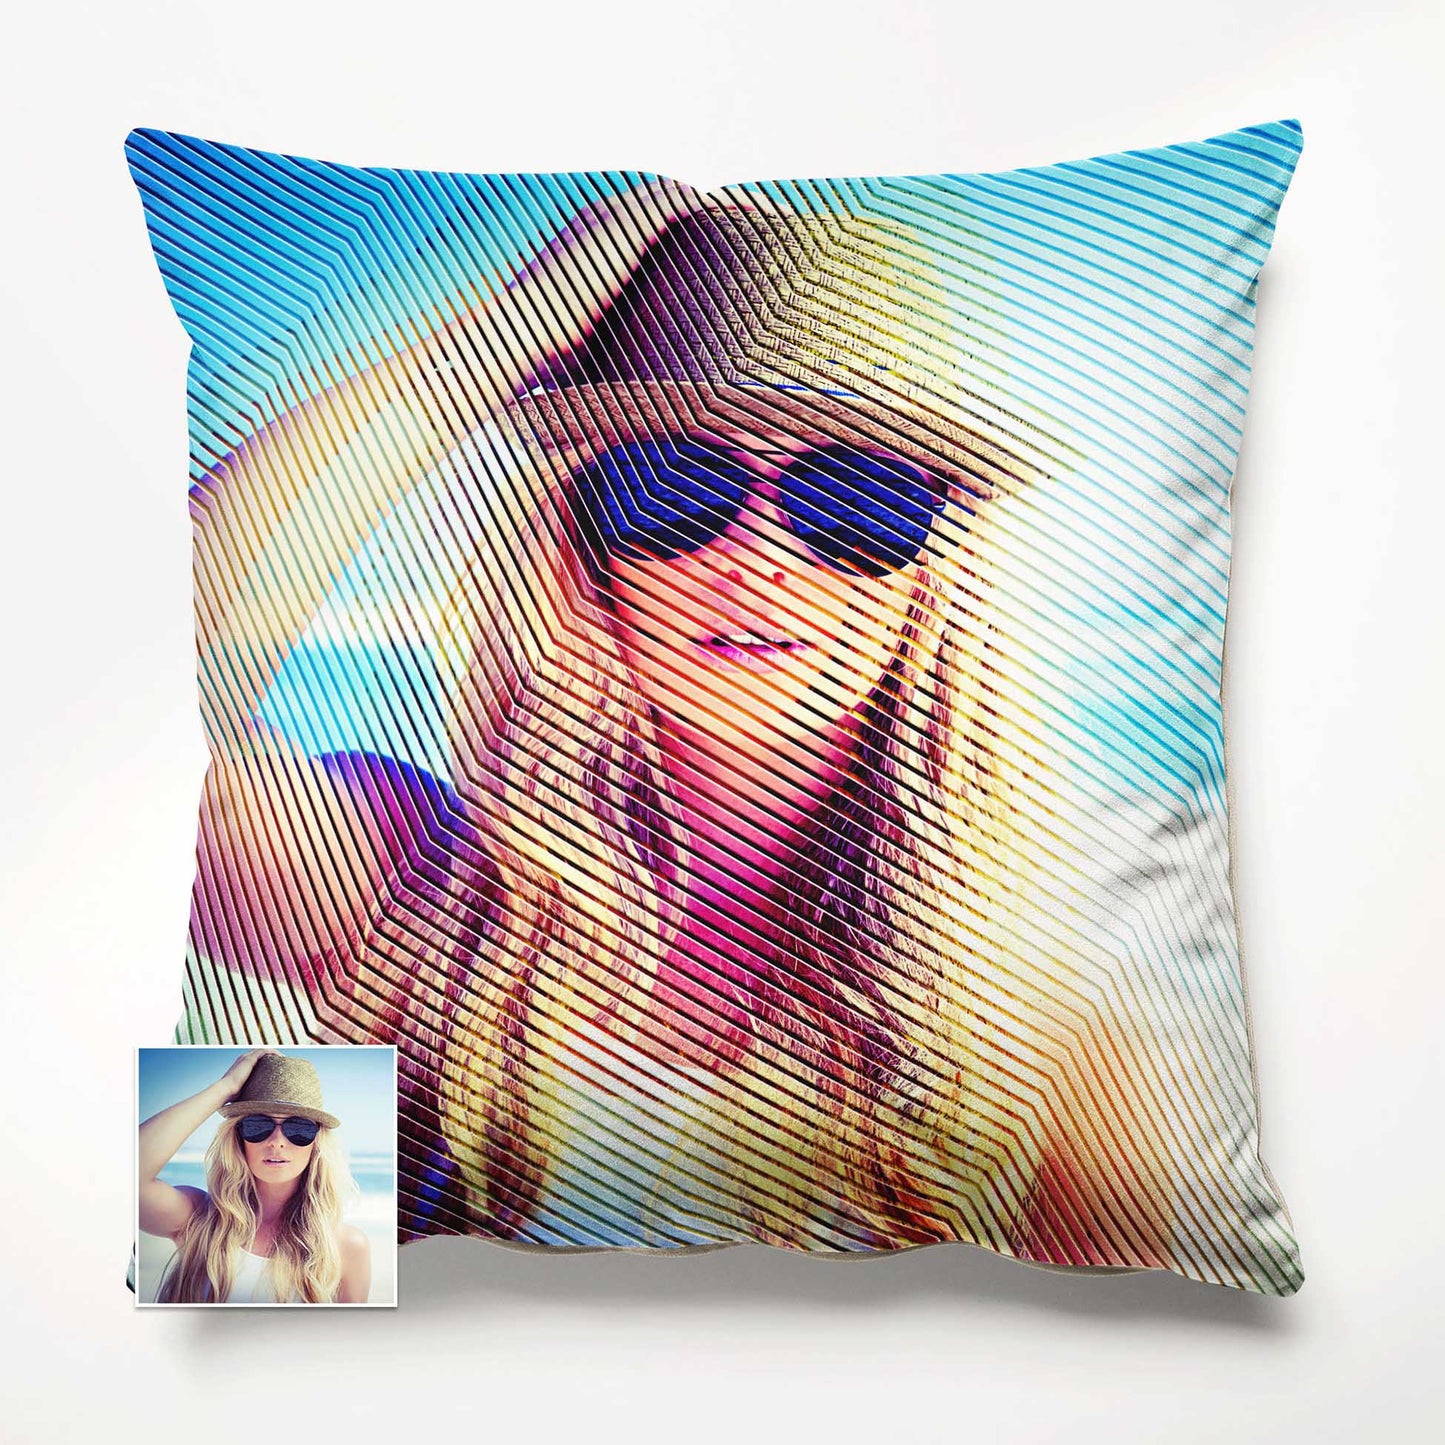 Experience the beauty of Personalised Abstract Lines Cushion in your home. Its colorful and abstract design, printed from a photo, brings a modern and vibrant feel to your space. Made from soft velvet fabric, cozy and luxurious 